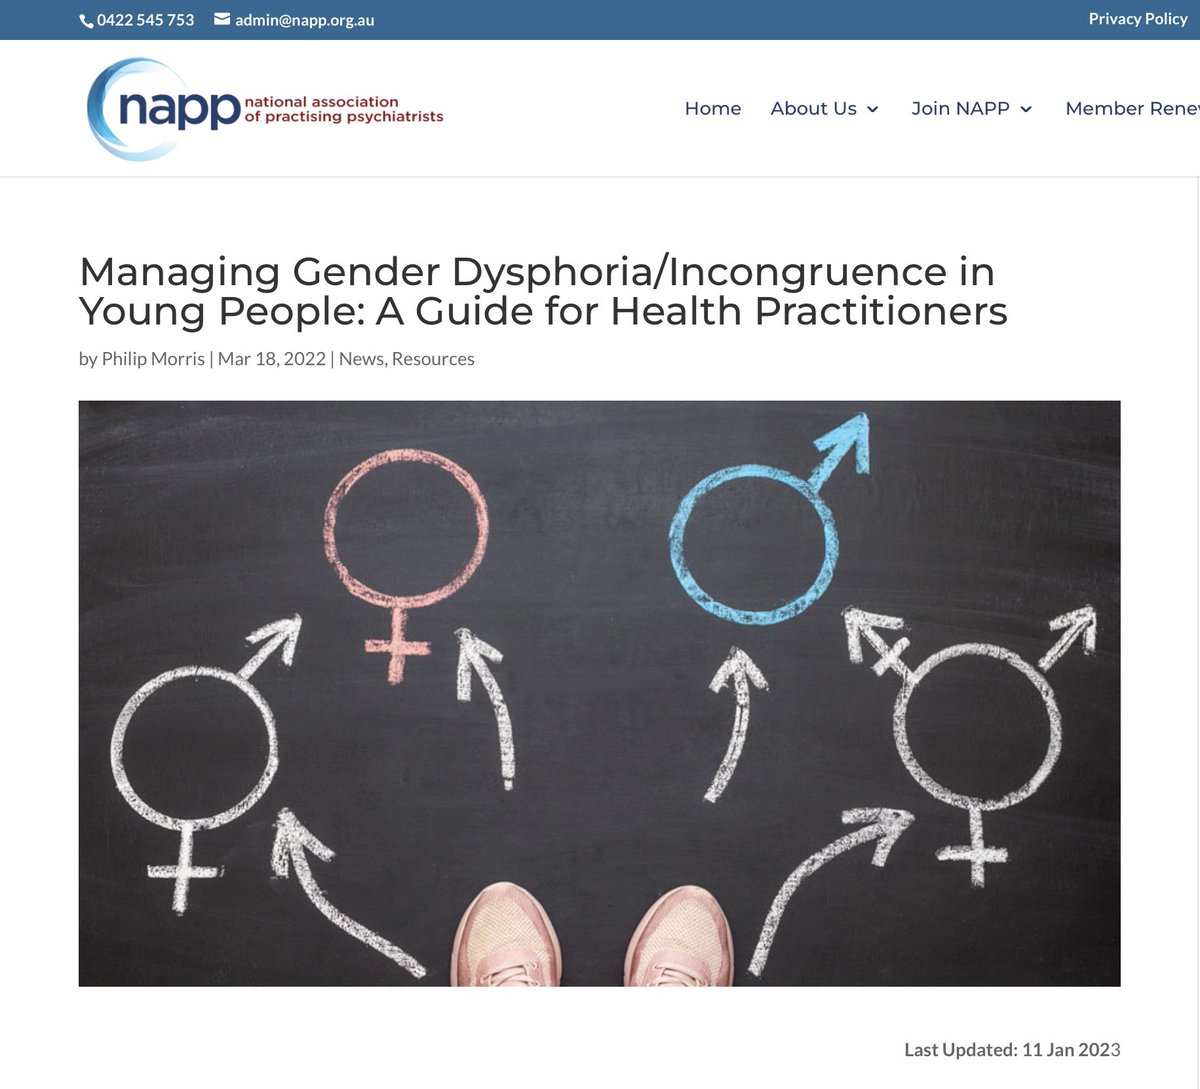 BREAKING: The Australian National Association of Practising Psychiatrists has released updated guidelines on the treatment of adolescents and young people presenting with gender dysphoria, urging for differential diagnosis and a cautious, rather than affirmative, approach. Great…